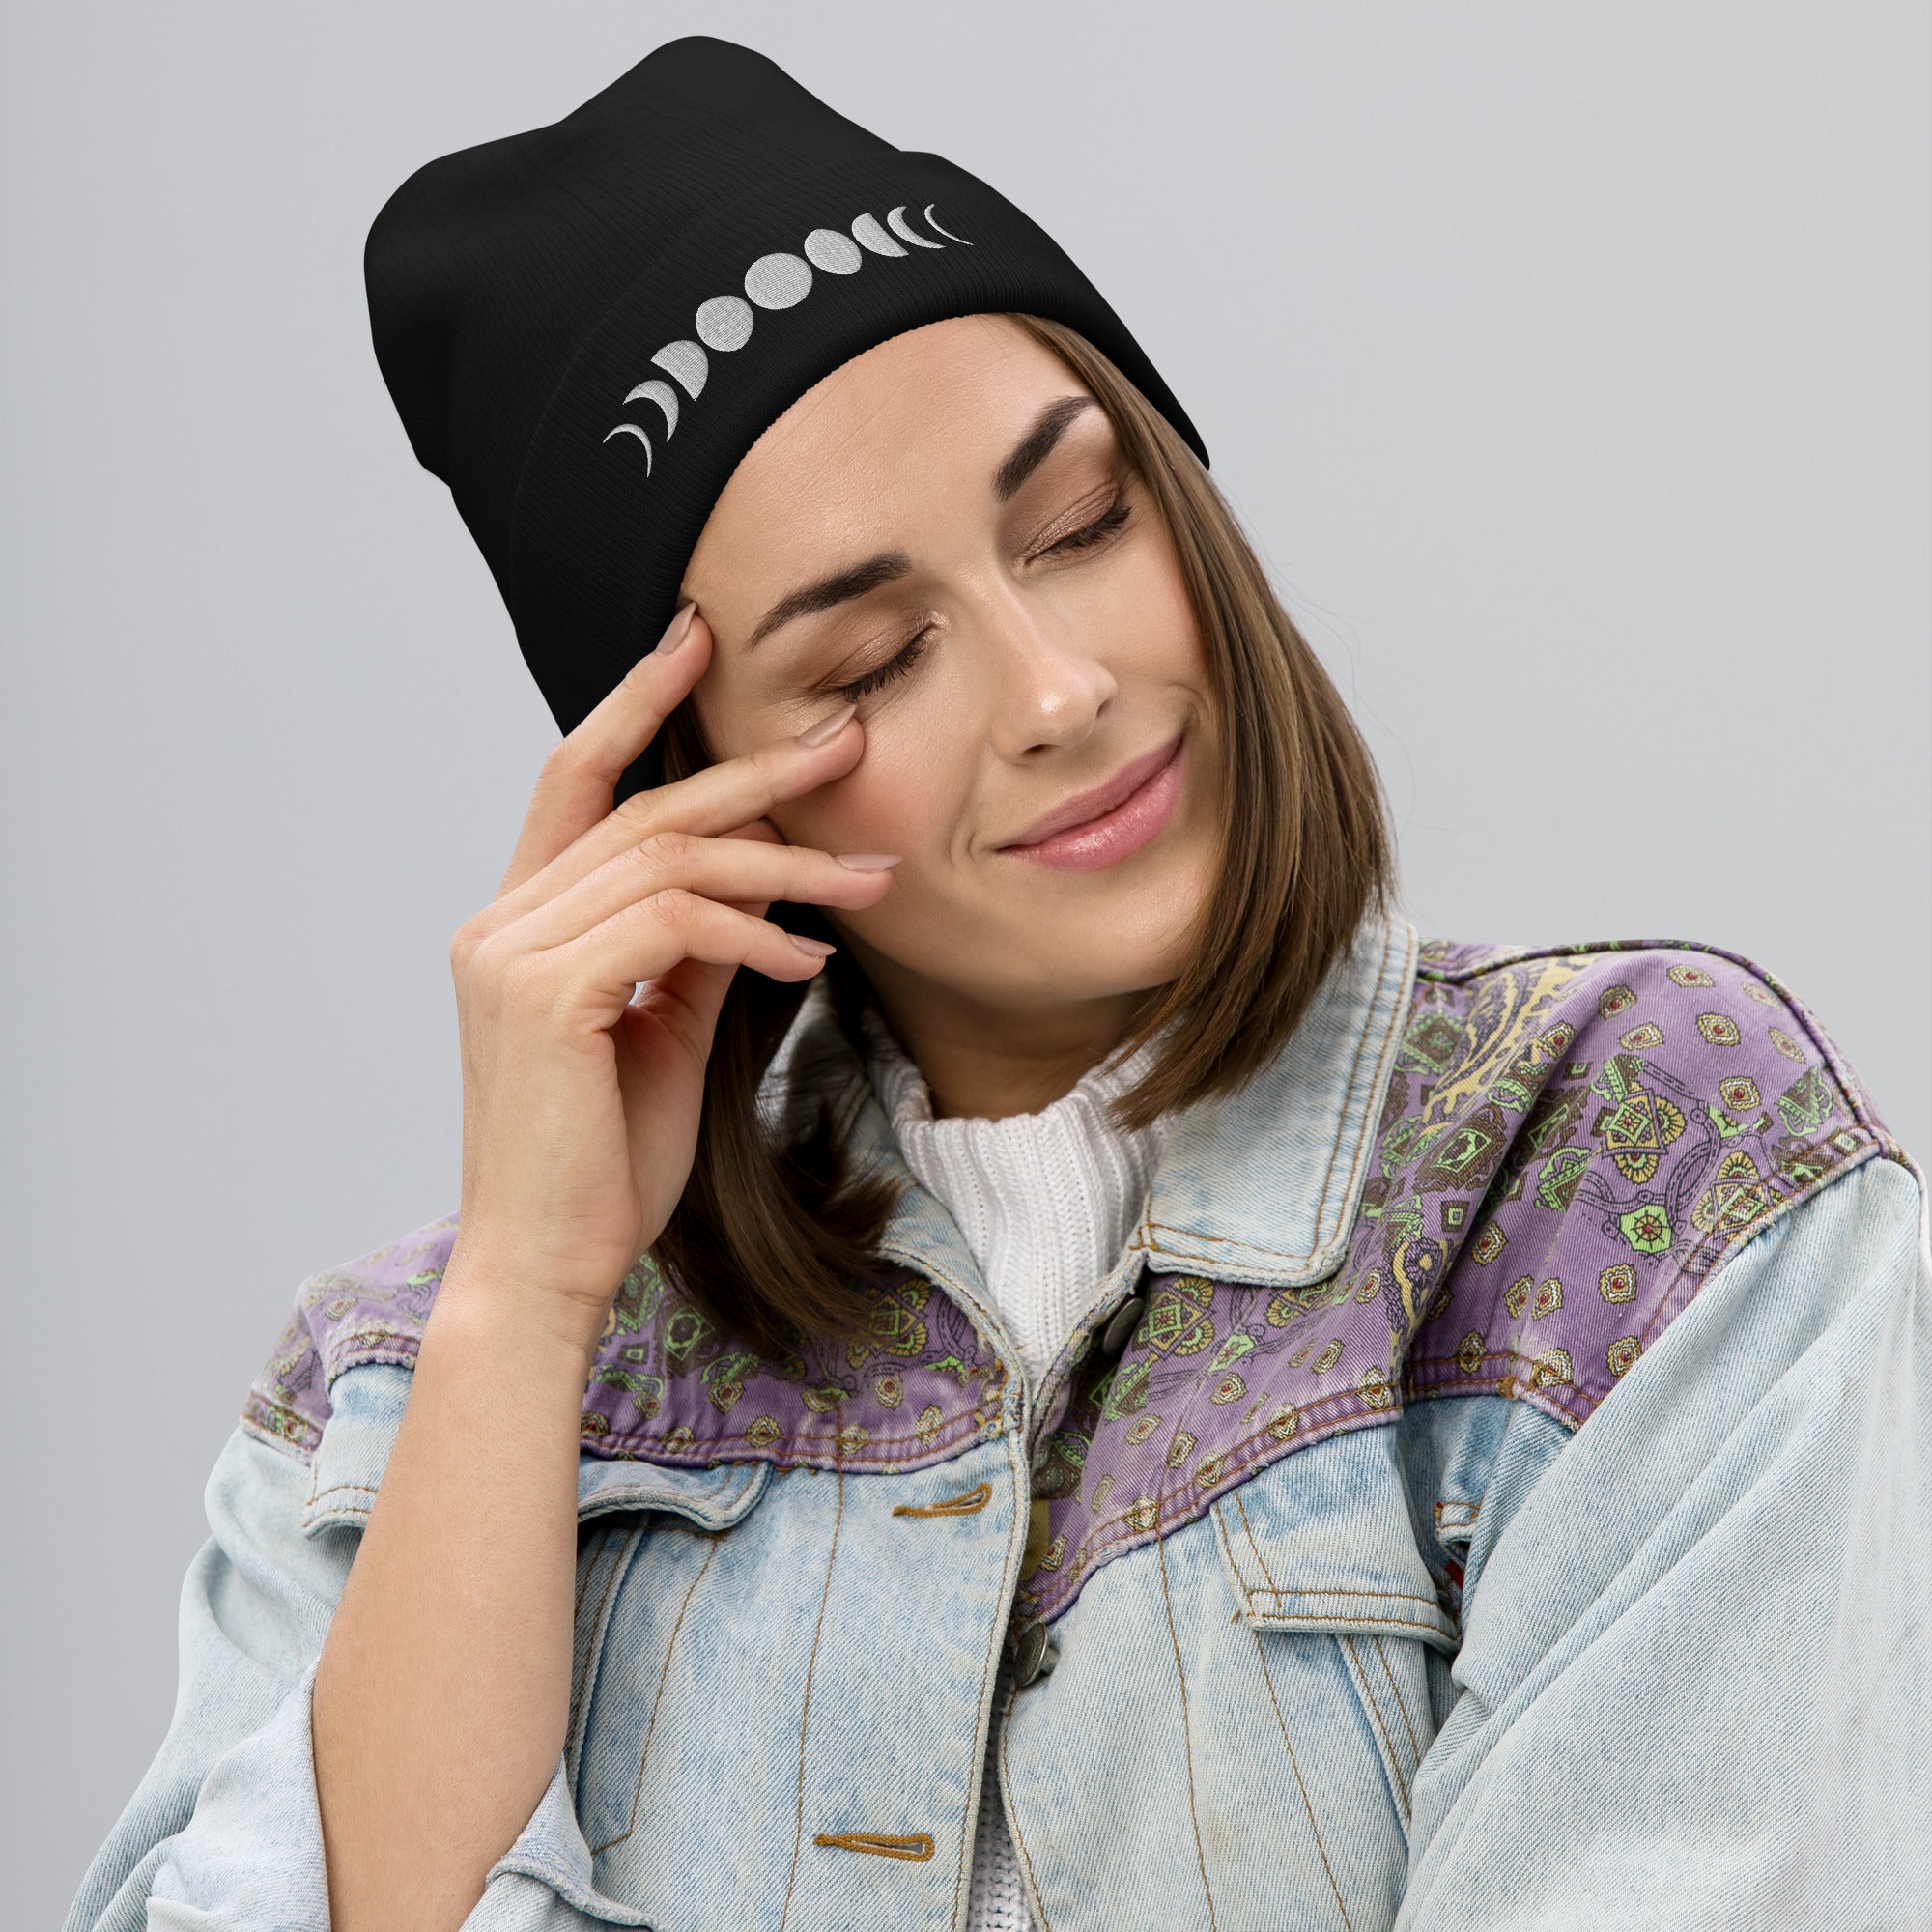 Moon Phases Lunar Cycle to Full Moon Embroidered Cuff Beanie - Edge of Life Designs